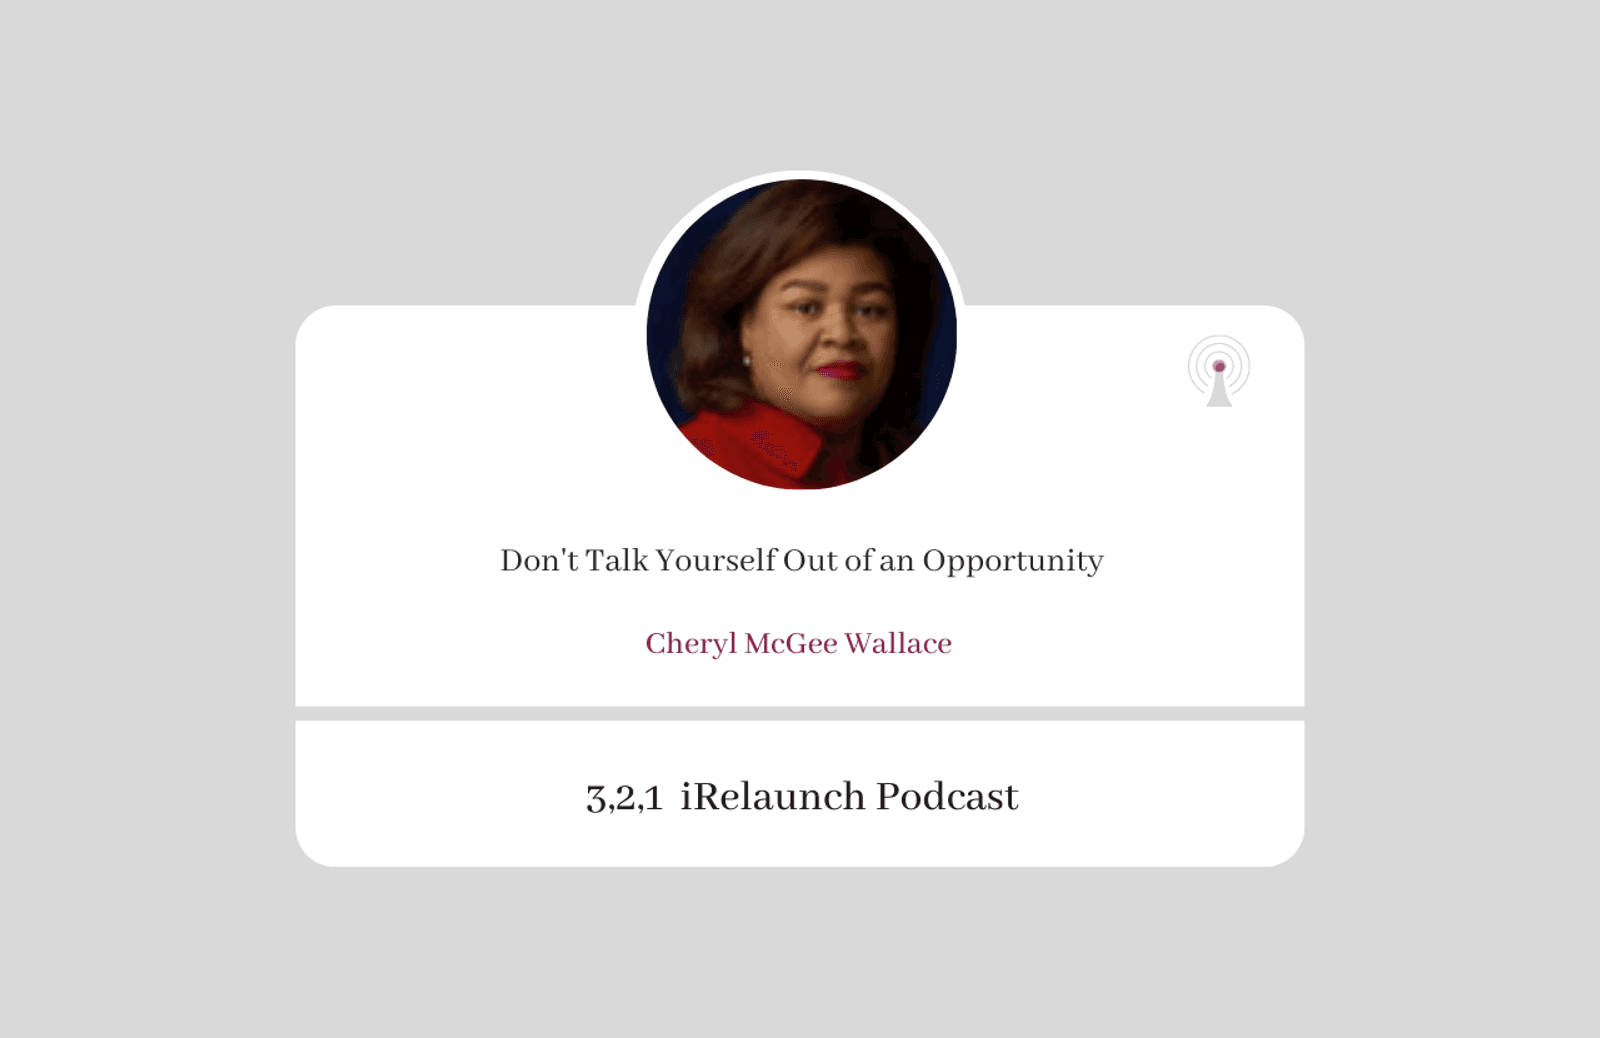 3, 2, 1 iRelaunch Podcast Thumbnail for Episode #204 with Cheryl McGee Wallace's headshot. The episode's title is: "Don't Talk Yourself Out of an Opportunity" which is a rebroadcast of Episode #9.